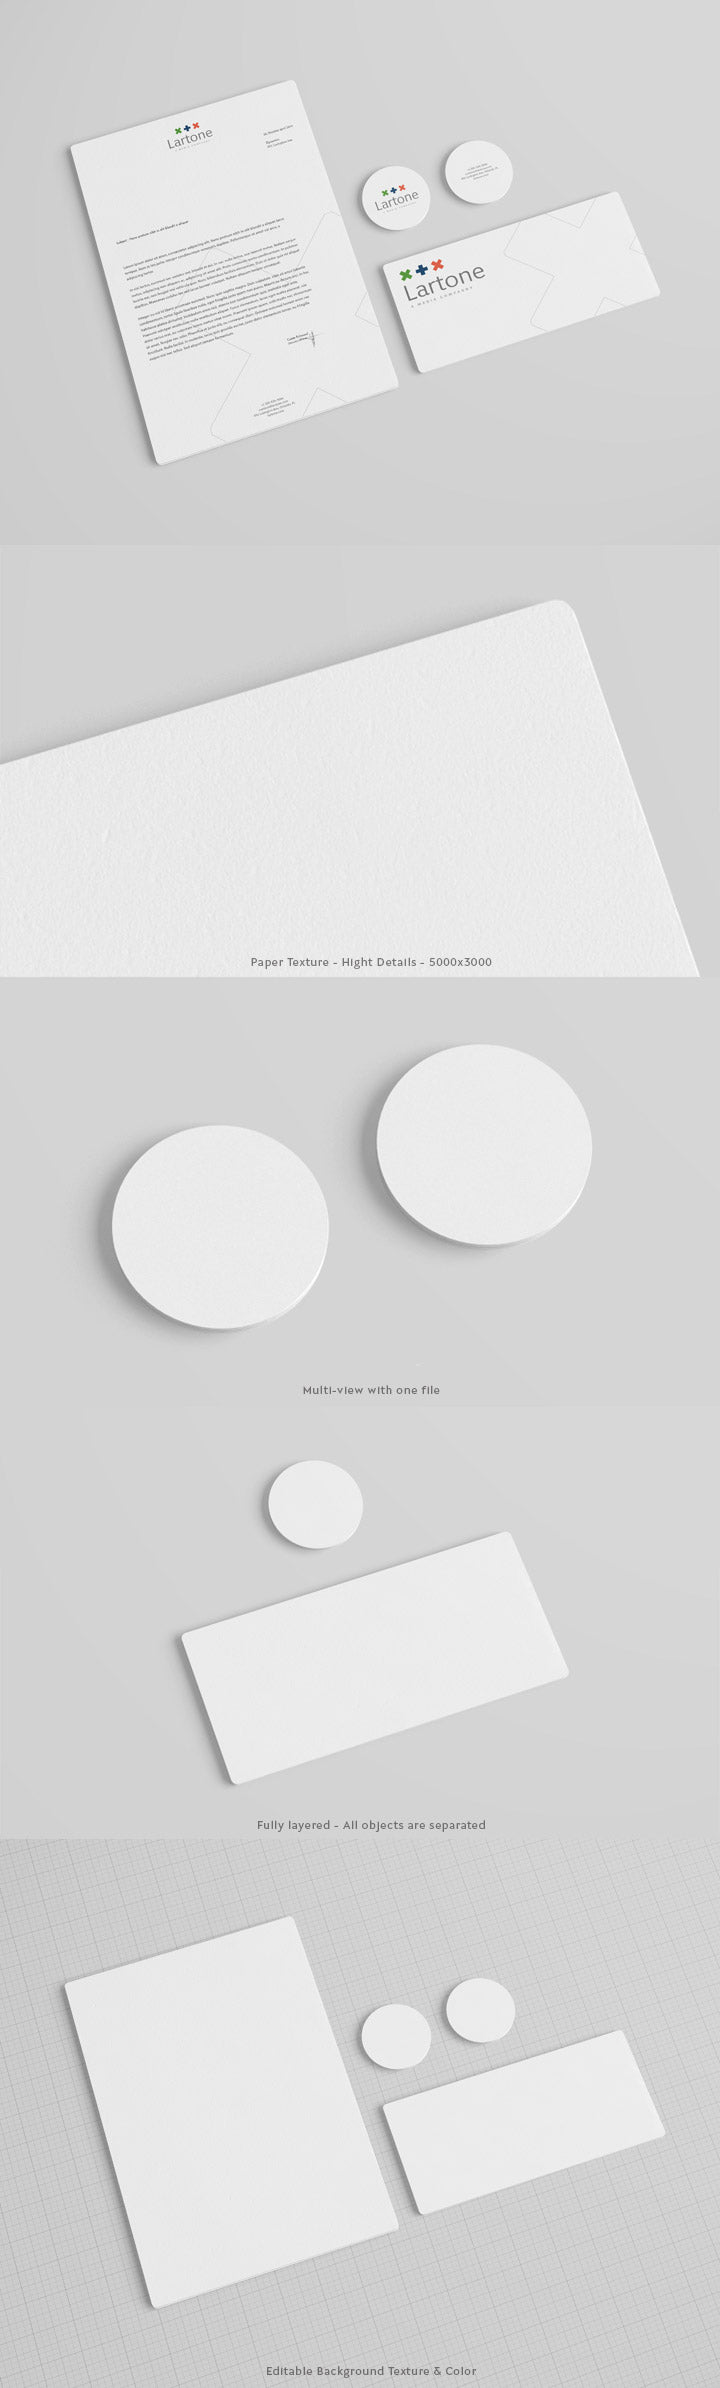 Free Stationery Mockup with Rounded Corner and Round Business Card